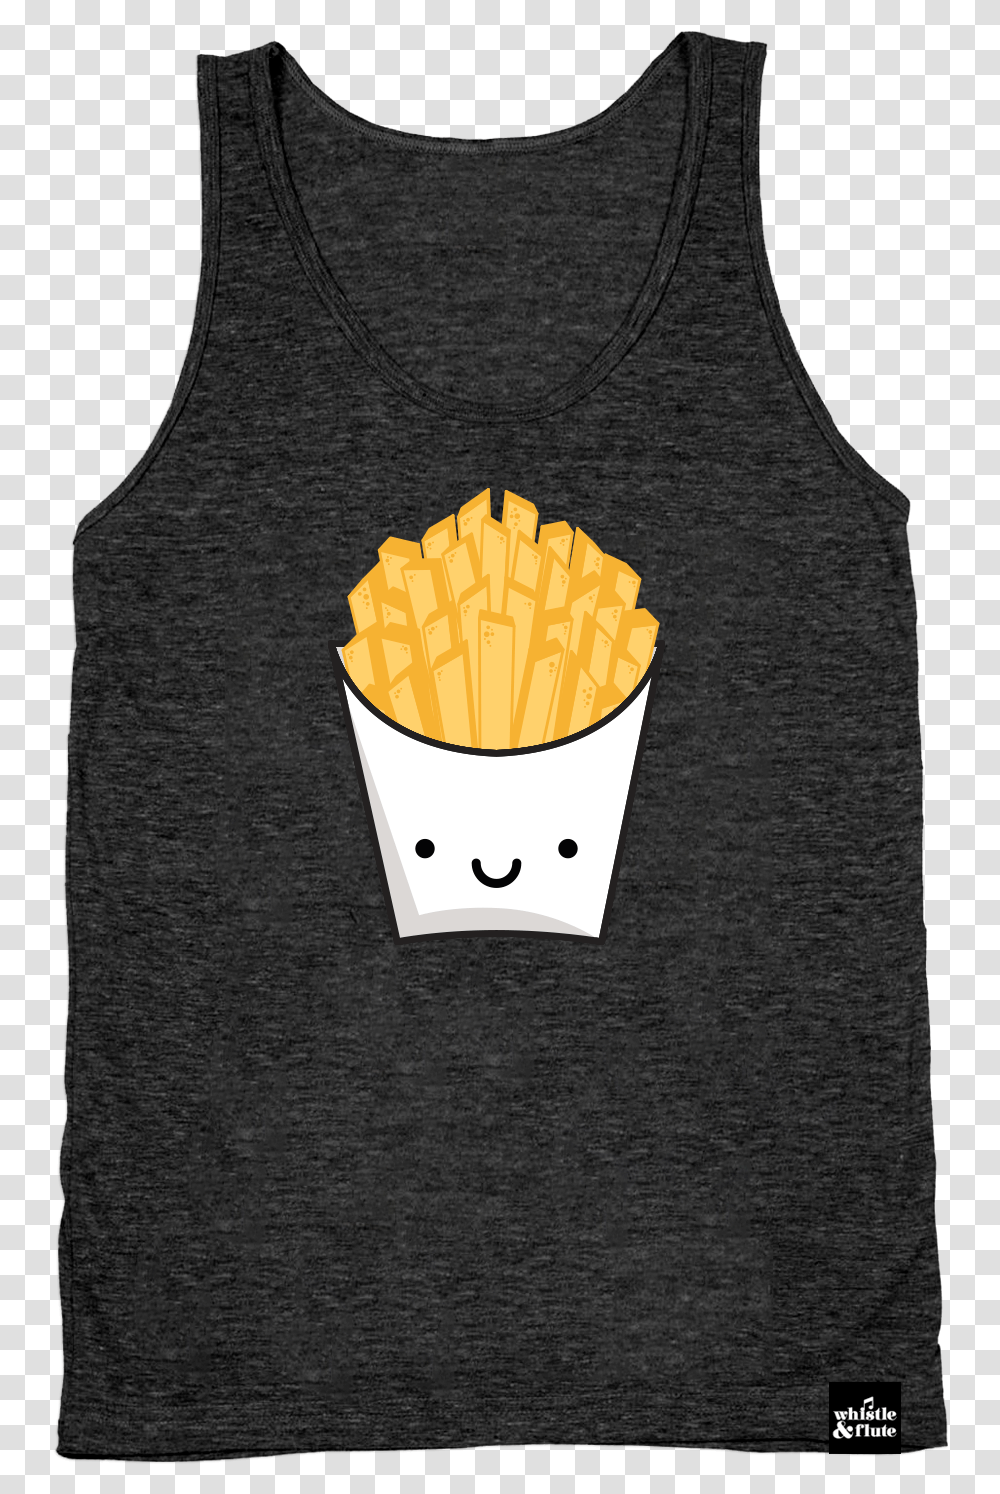 Flute Whistle French Fries, Apparel, Food, Tank Top Transparent Png